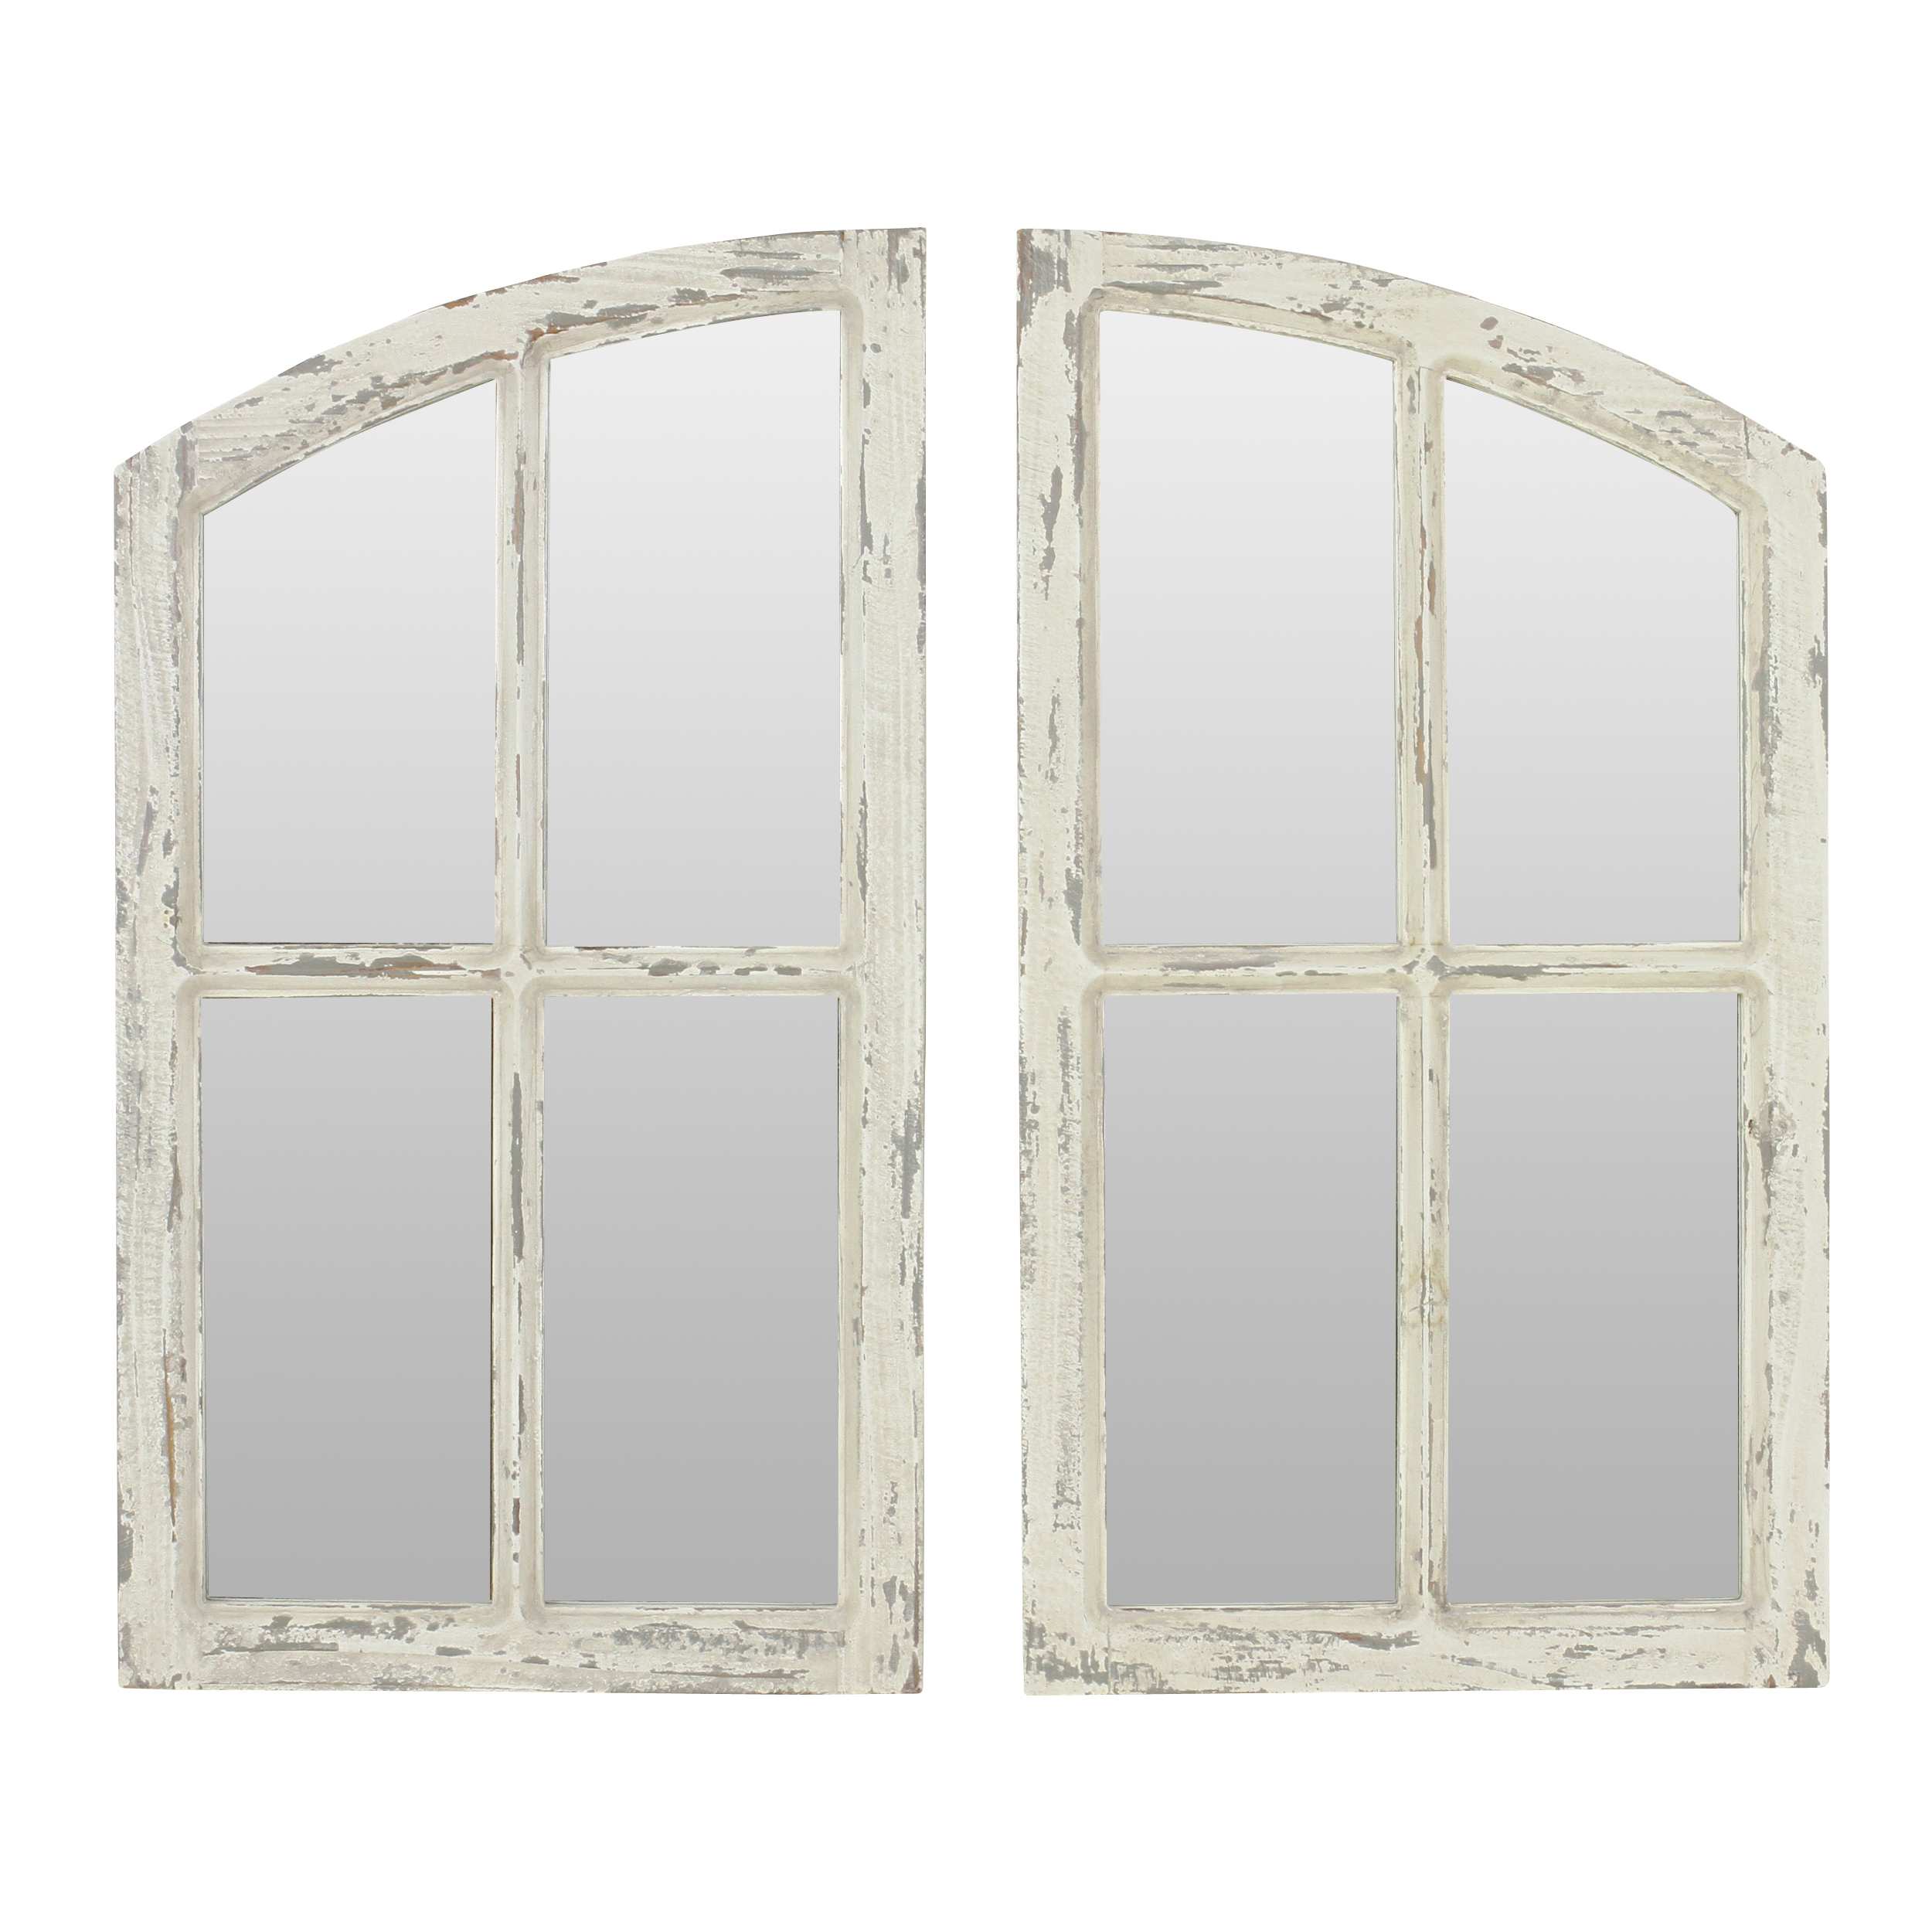 Jolene Arch Window Pane Mirrors Off-White 27" x 15" (Set of 2) by Aspire - image 2 of 6